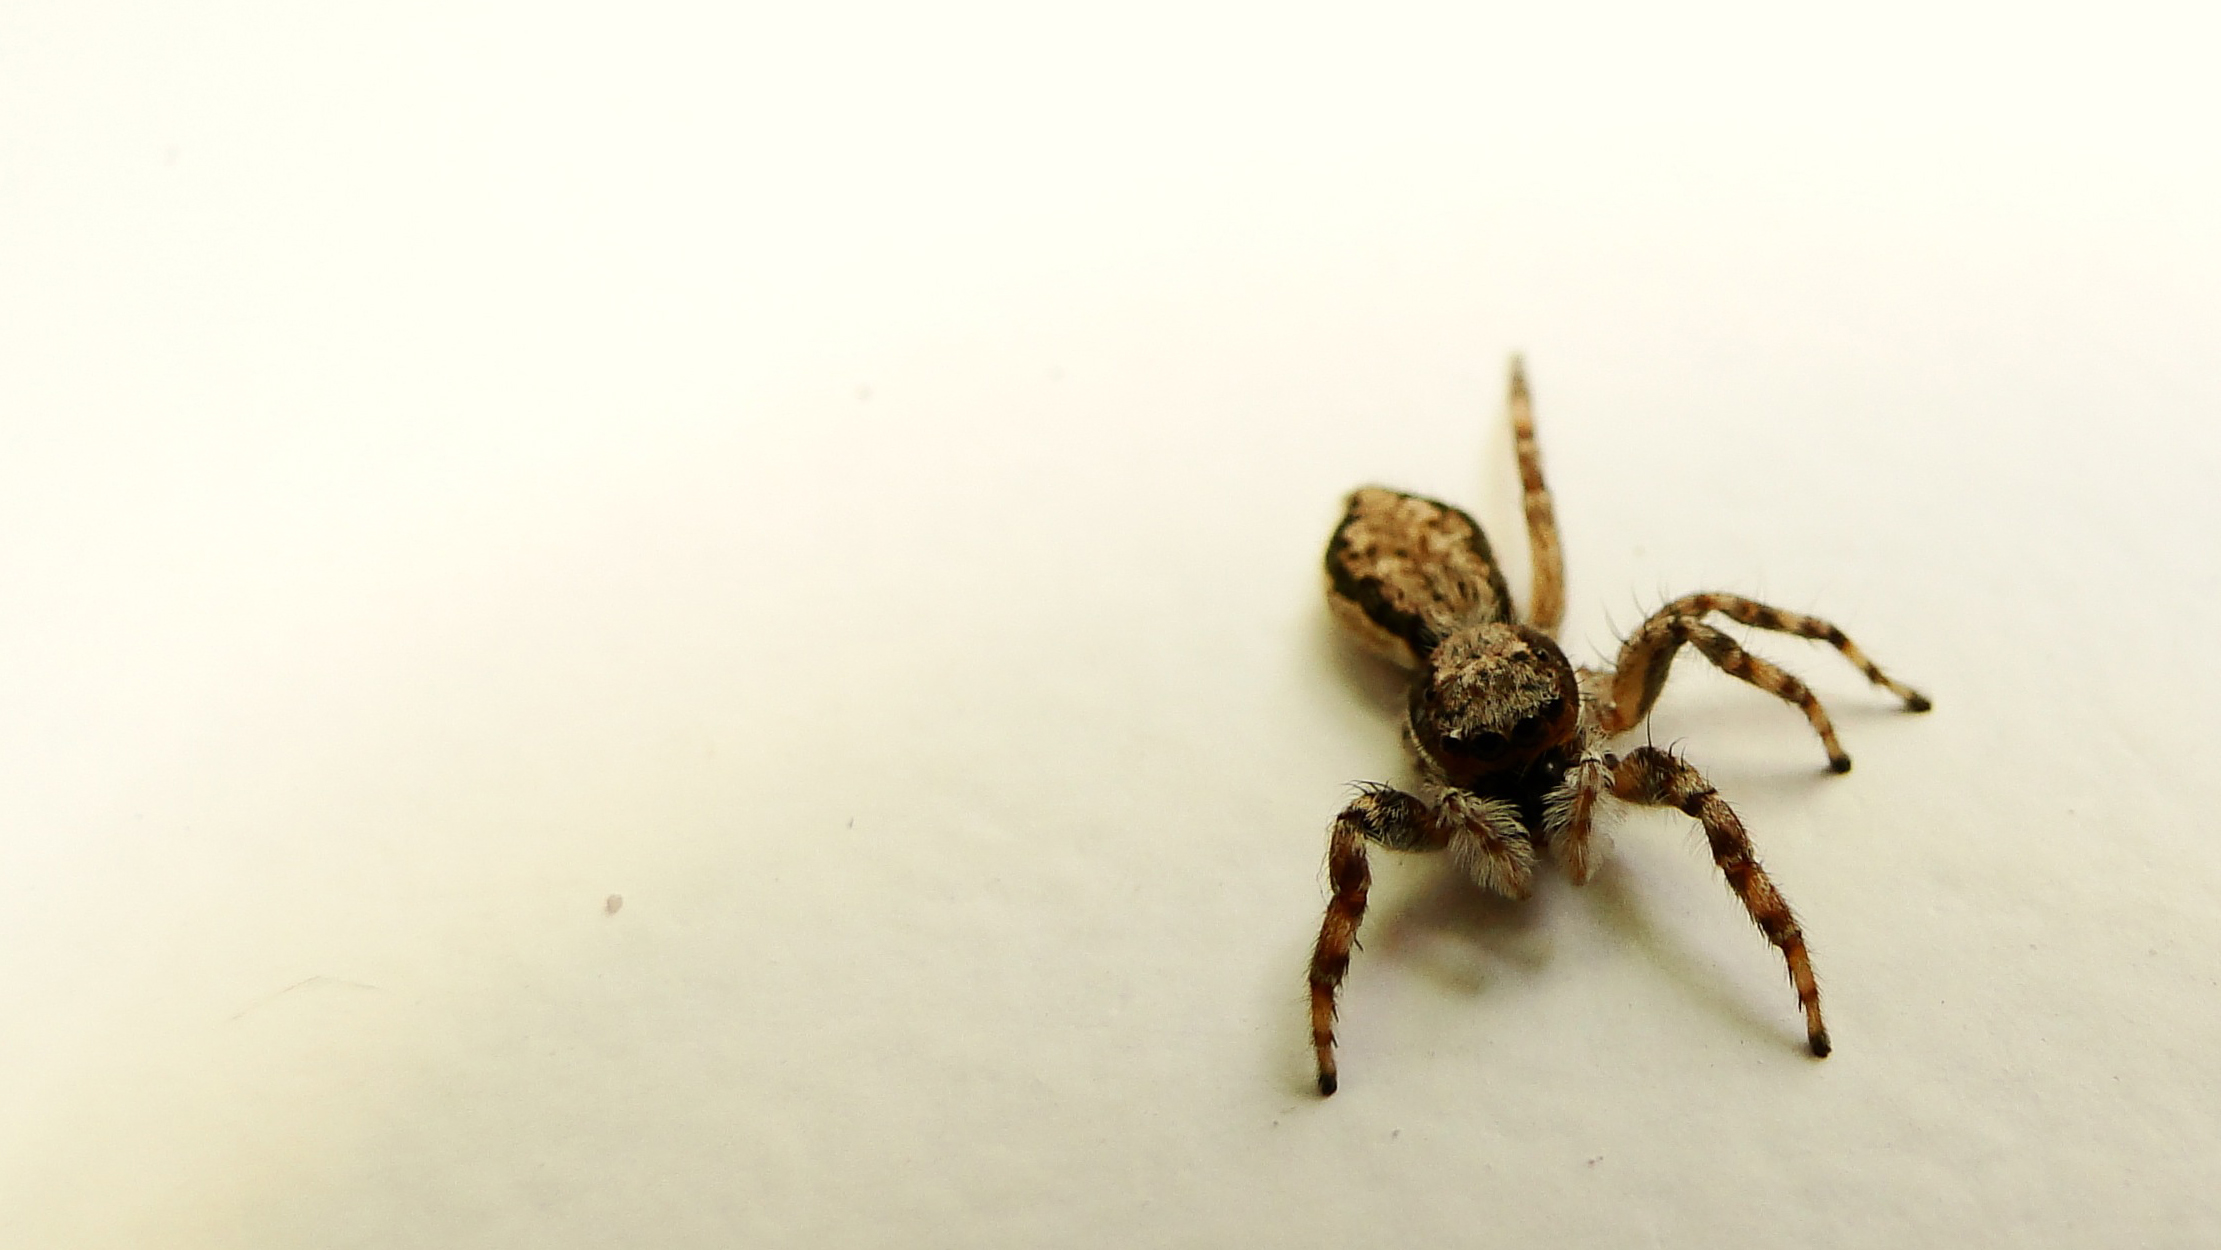 a spider with very long legs, on white surface